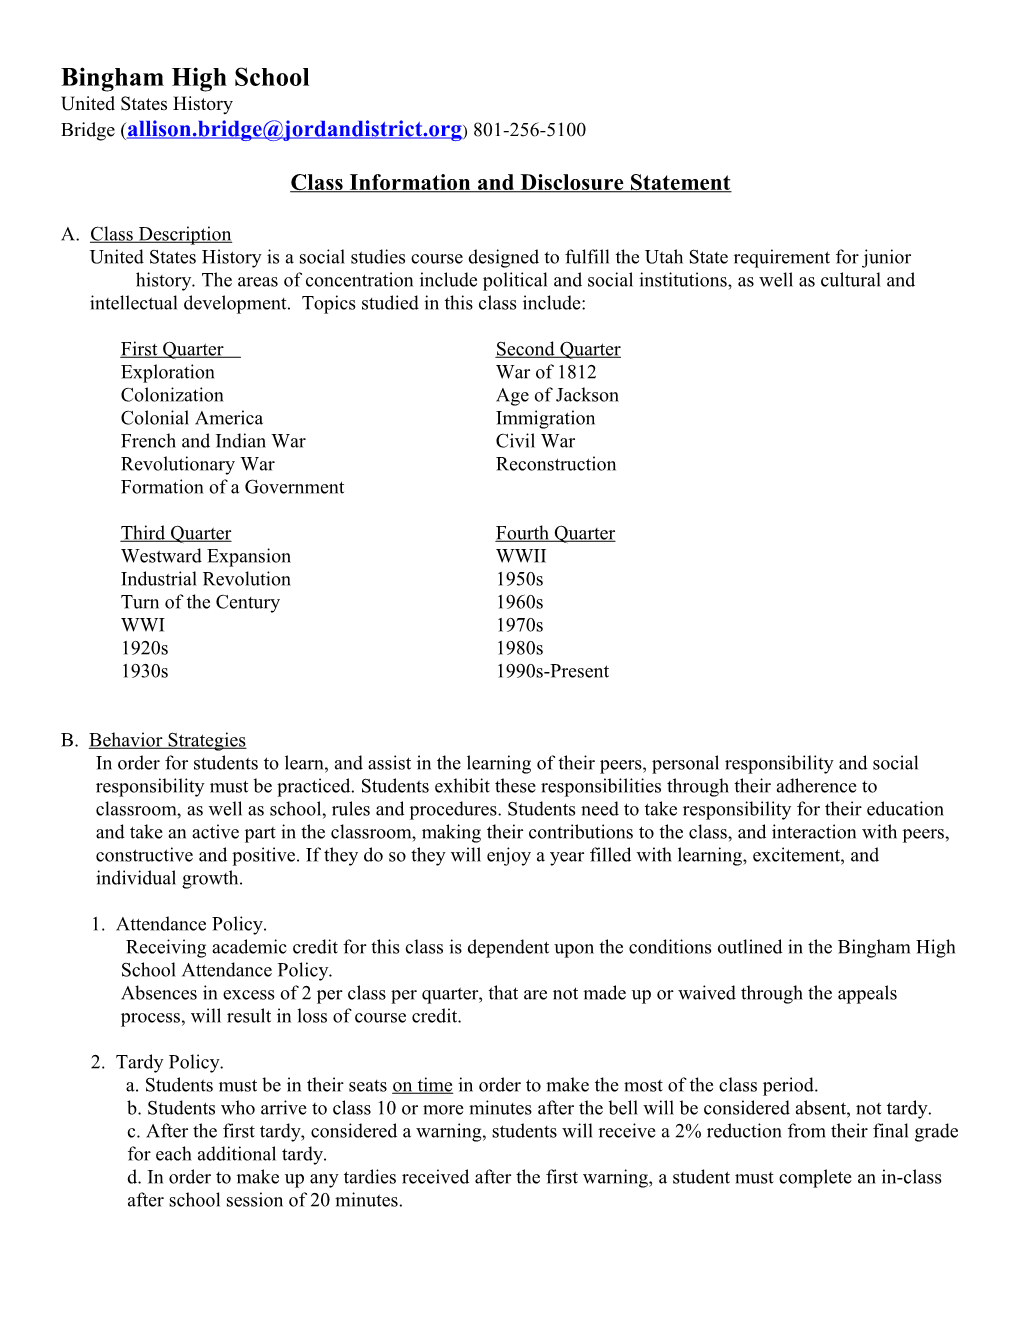 Class Information and Disclosure Statement